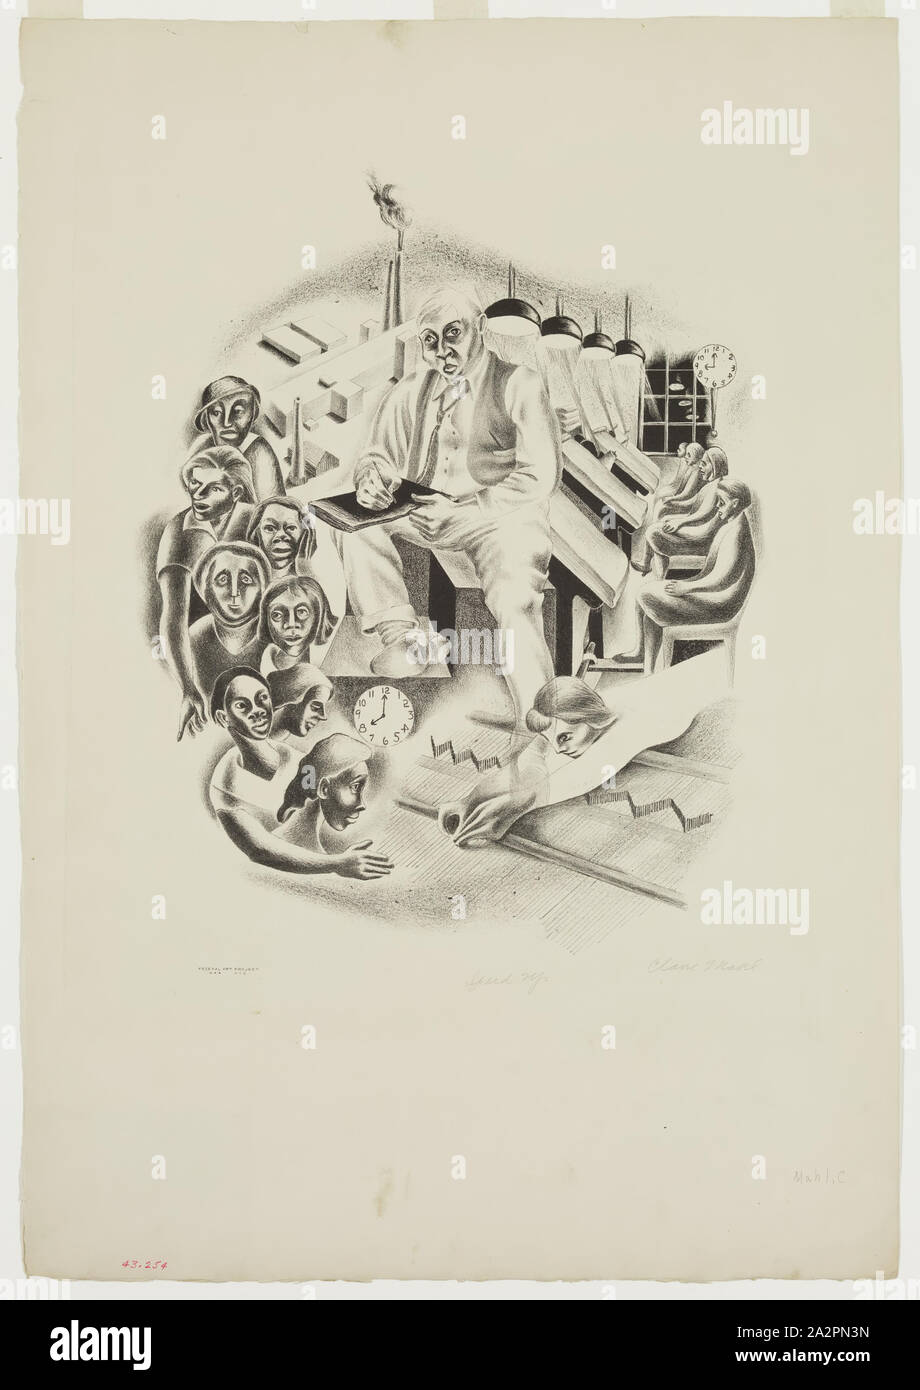 Claire Mahl, American, 1912-1988, Speed Up, ca. 1936, lithograph printed in black ink on wove paper, Image: 14 1/2 × 11 1/2 inches (36.8 × 29.2 cm Stock Photo